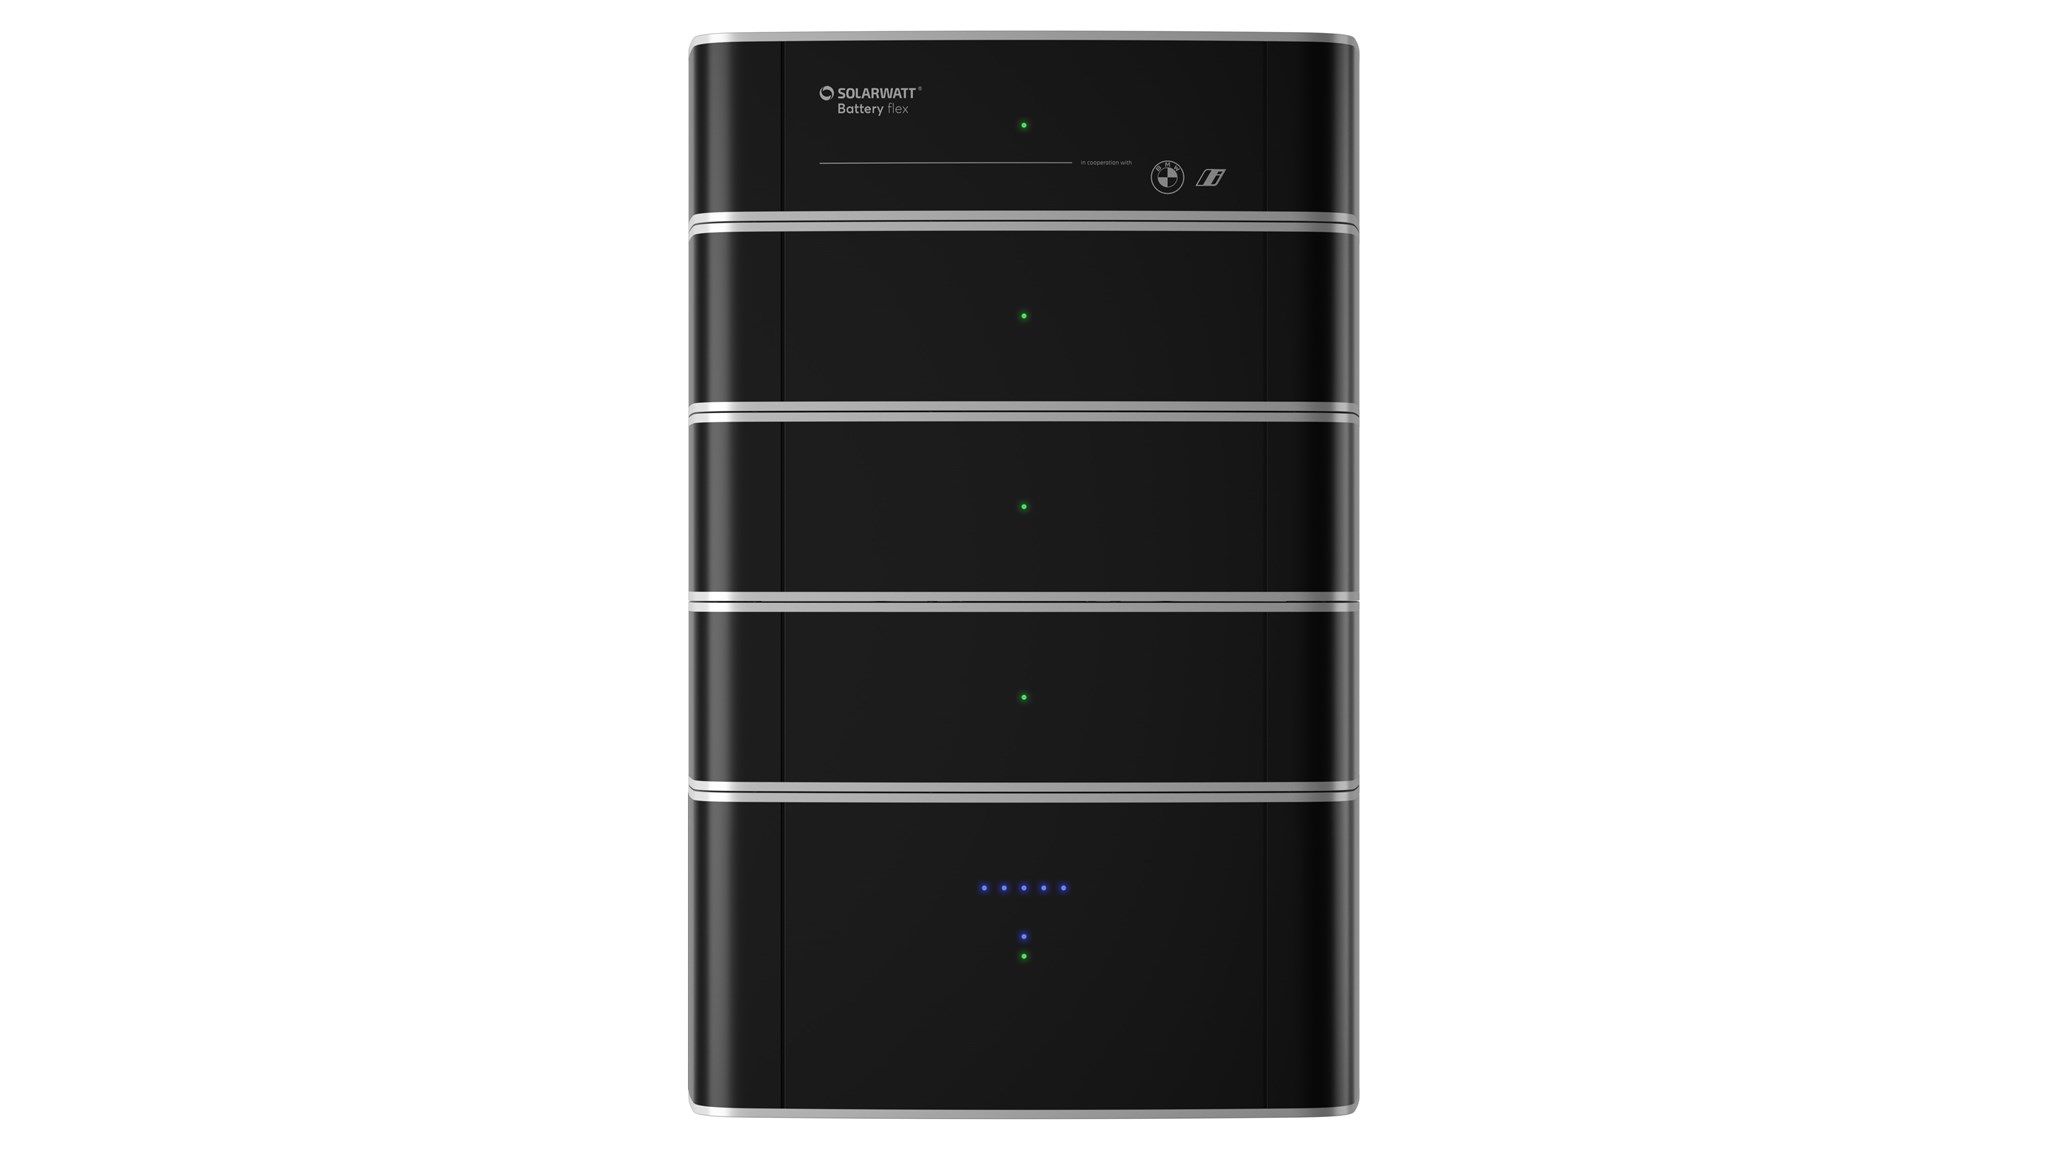 Picture of Solarwatt battery storage AC-1 1.3 - 9.6 kWh battery inverter, 1-phase, lithium-ion